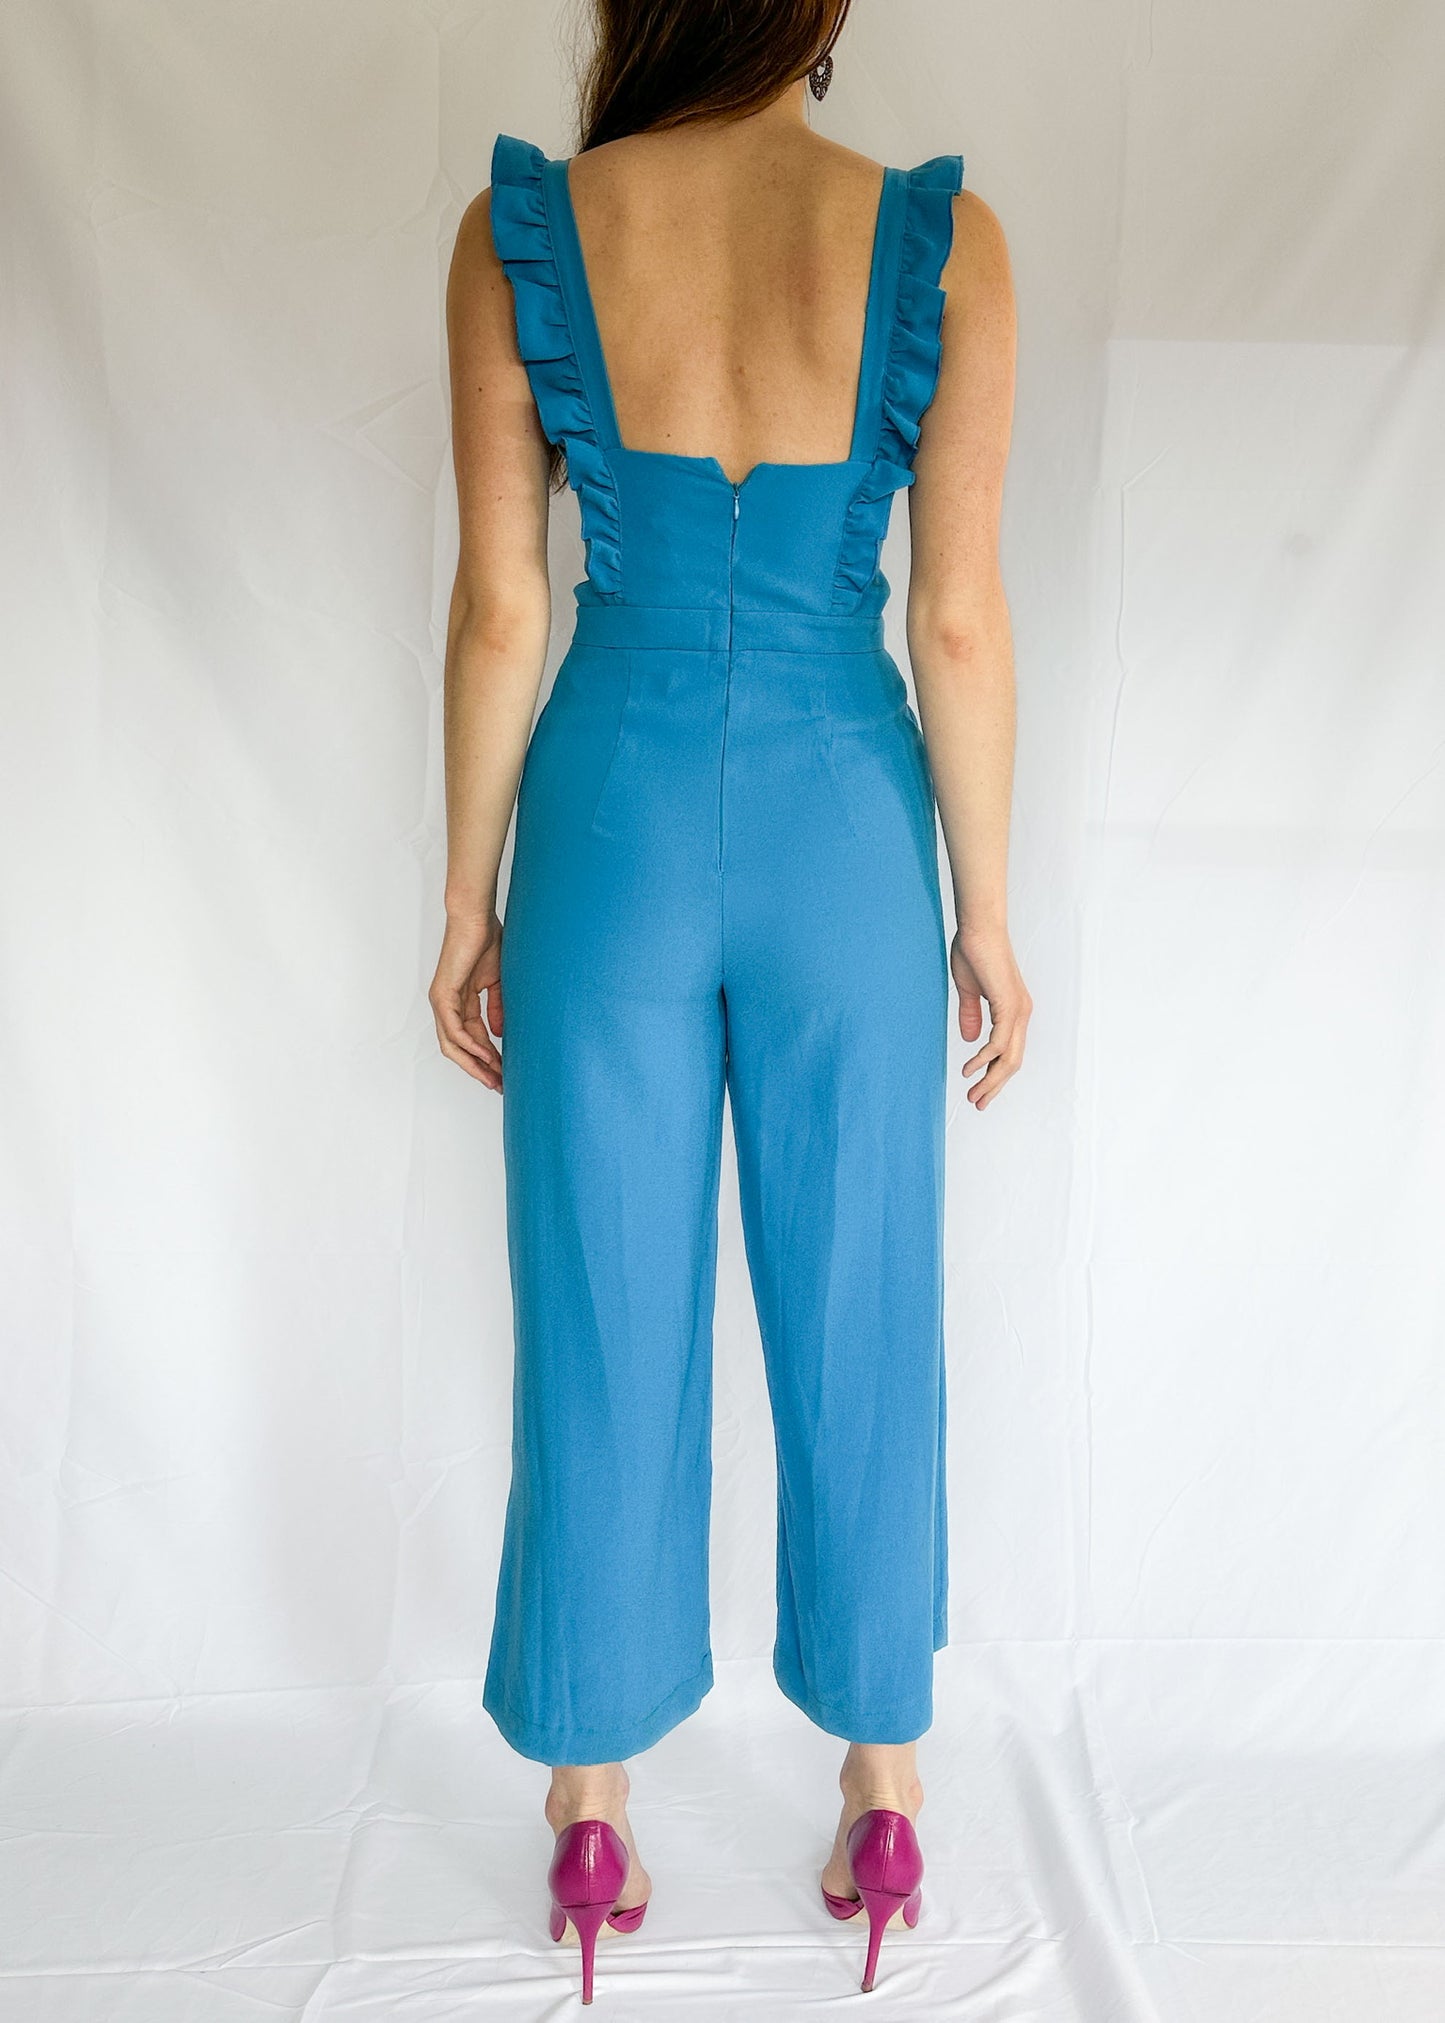 Brand New Lily Blue Ruffle Jumpsuit Size 36 US S